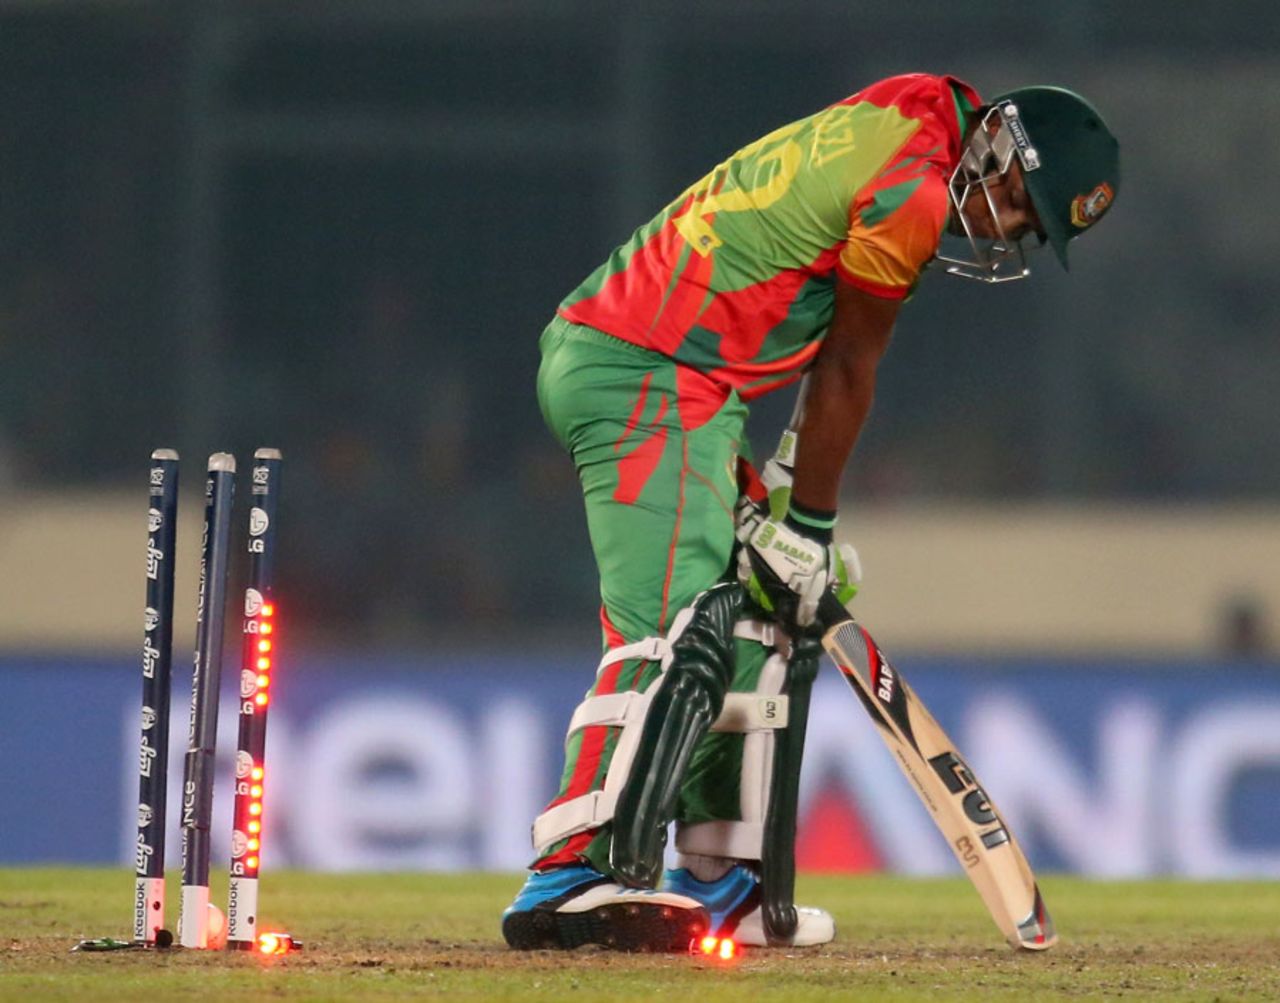 Sohag Gazi is bowled by an Andre Russel yorker, Bangladesh v West Indies, World T20, Group 2, Mirpur, March 25, 2014